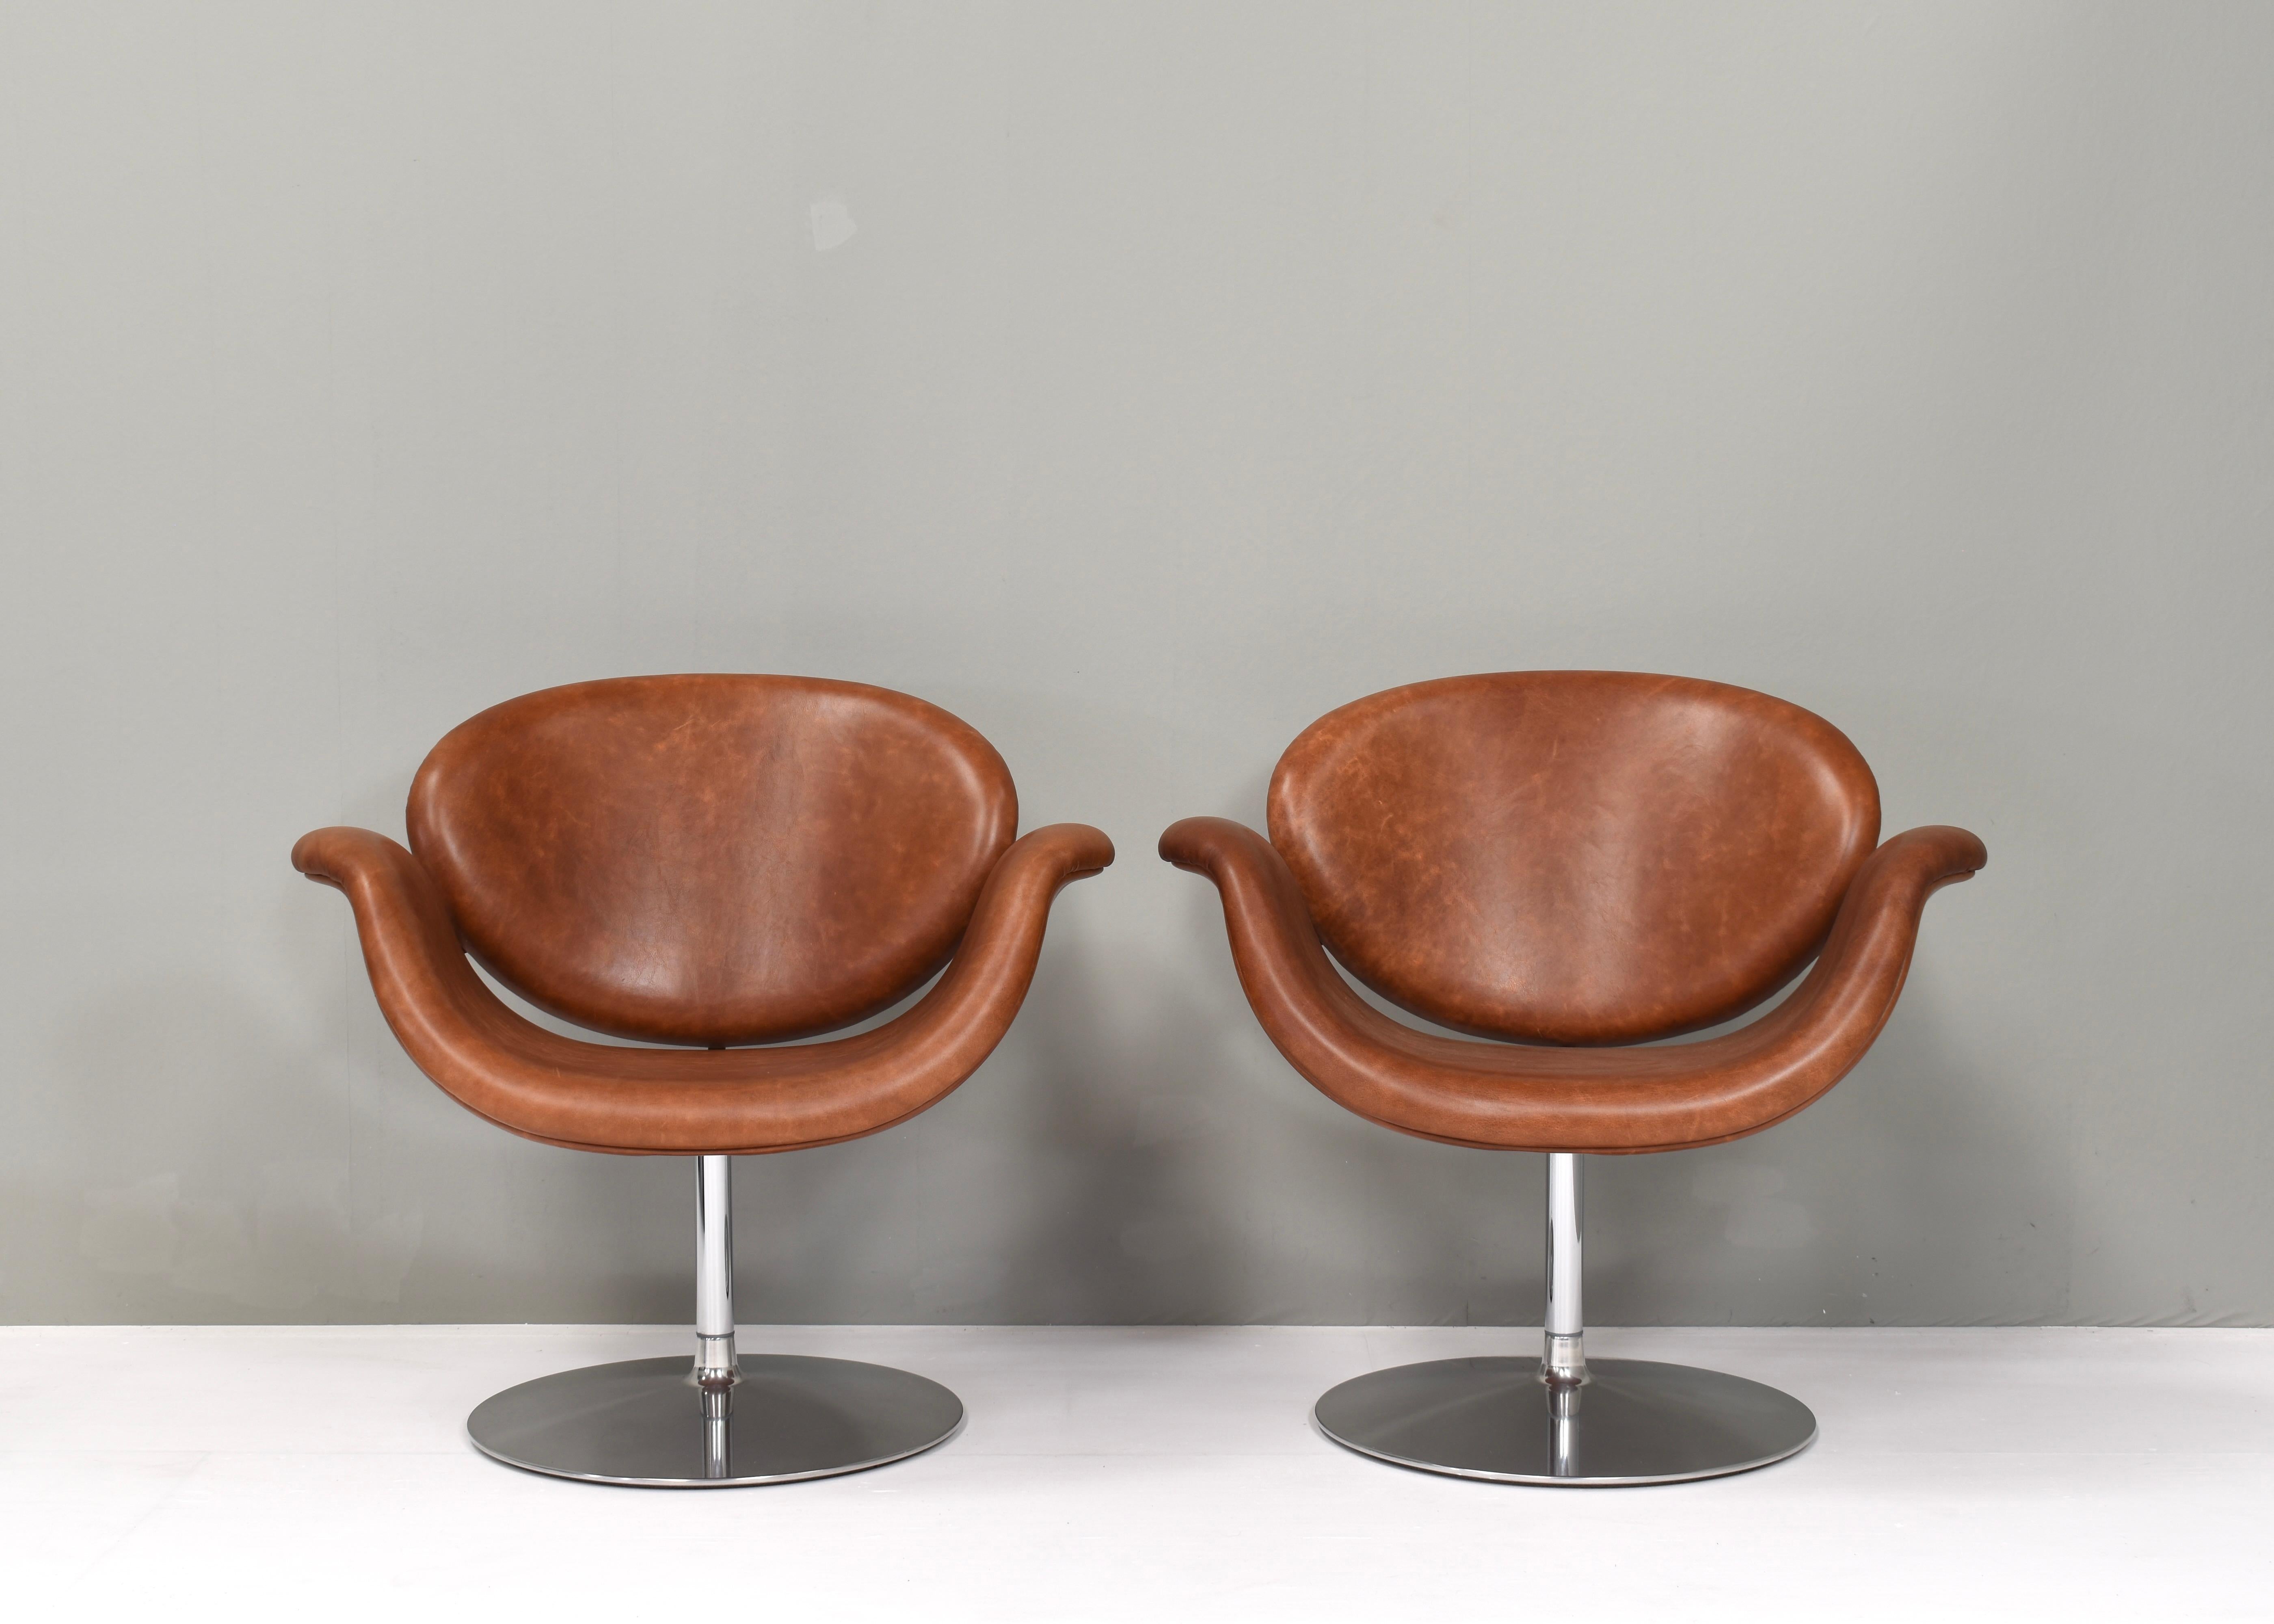 Iconic Tulip Midi swivel chairs by Pierre Paulin for Artifort, Netherlands – 1960.
The chairs have been reupholstered by Artifort in a custom leather by Alphenberg.
This model is very comfortable and gives good ergonomic support, in particular to